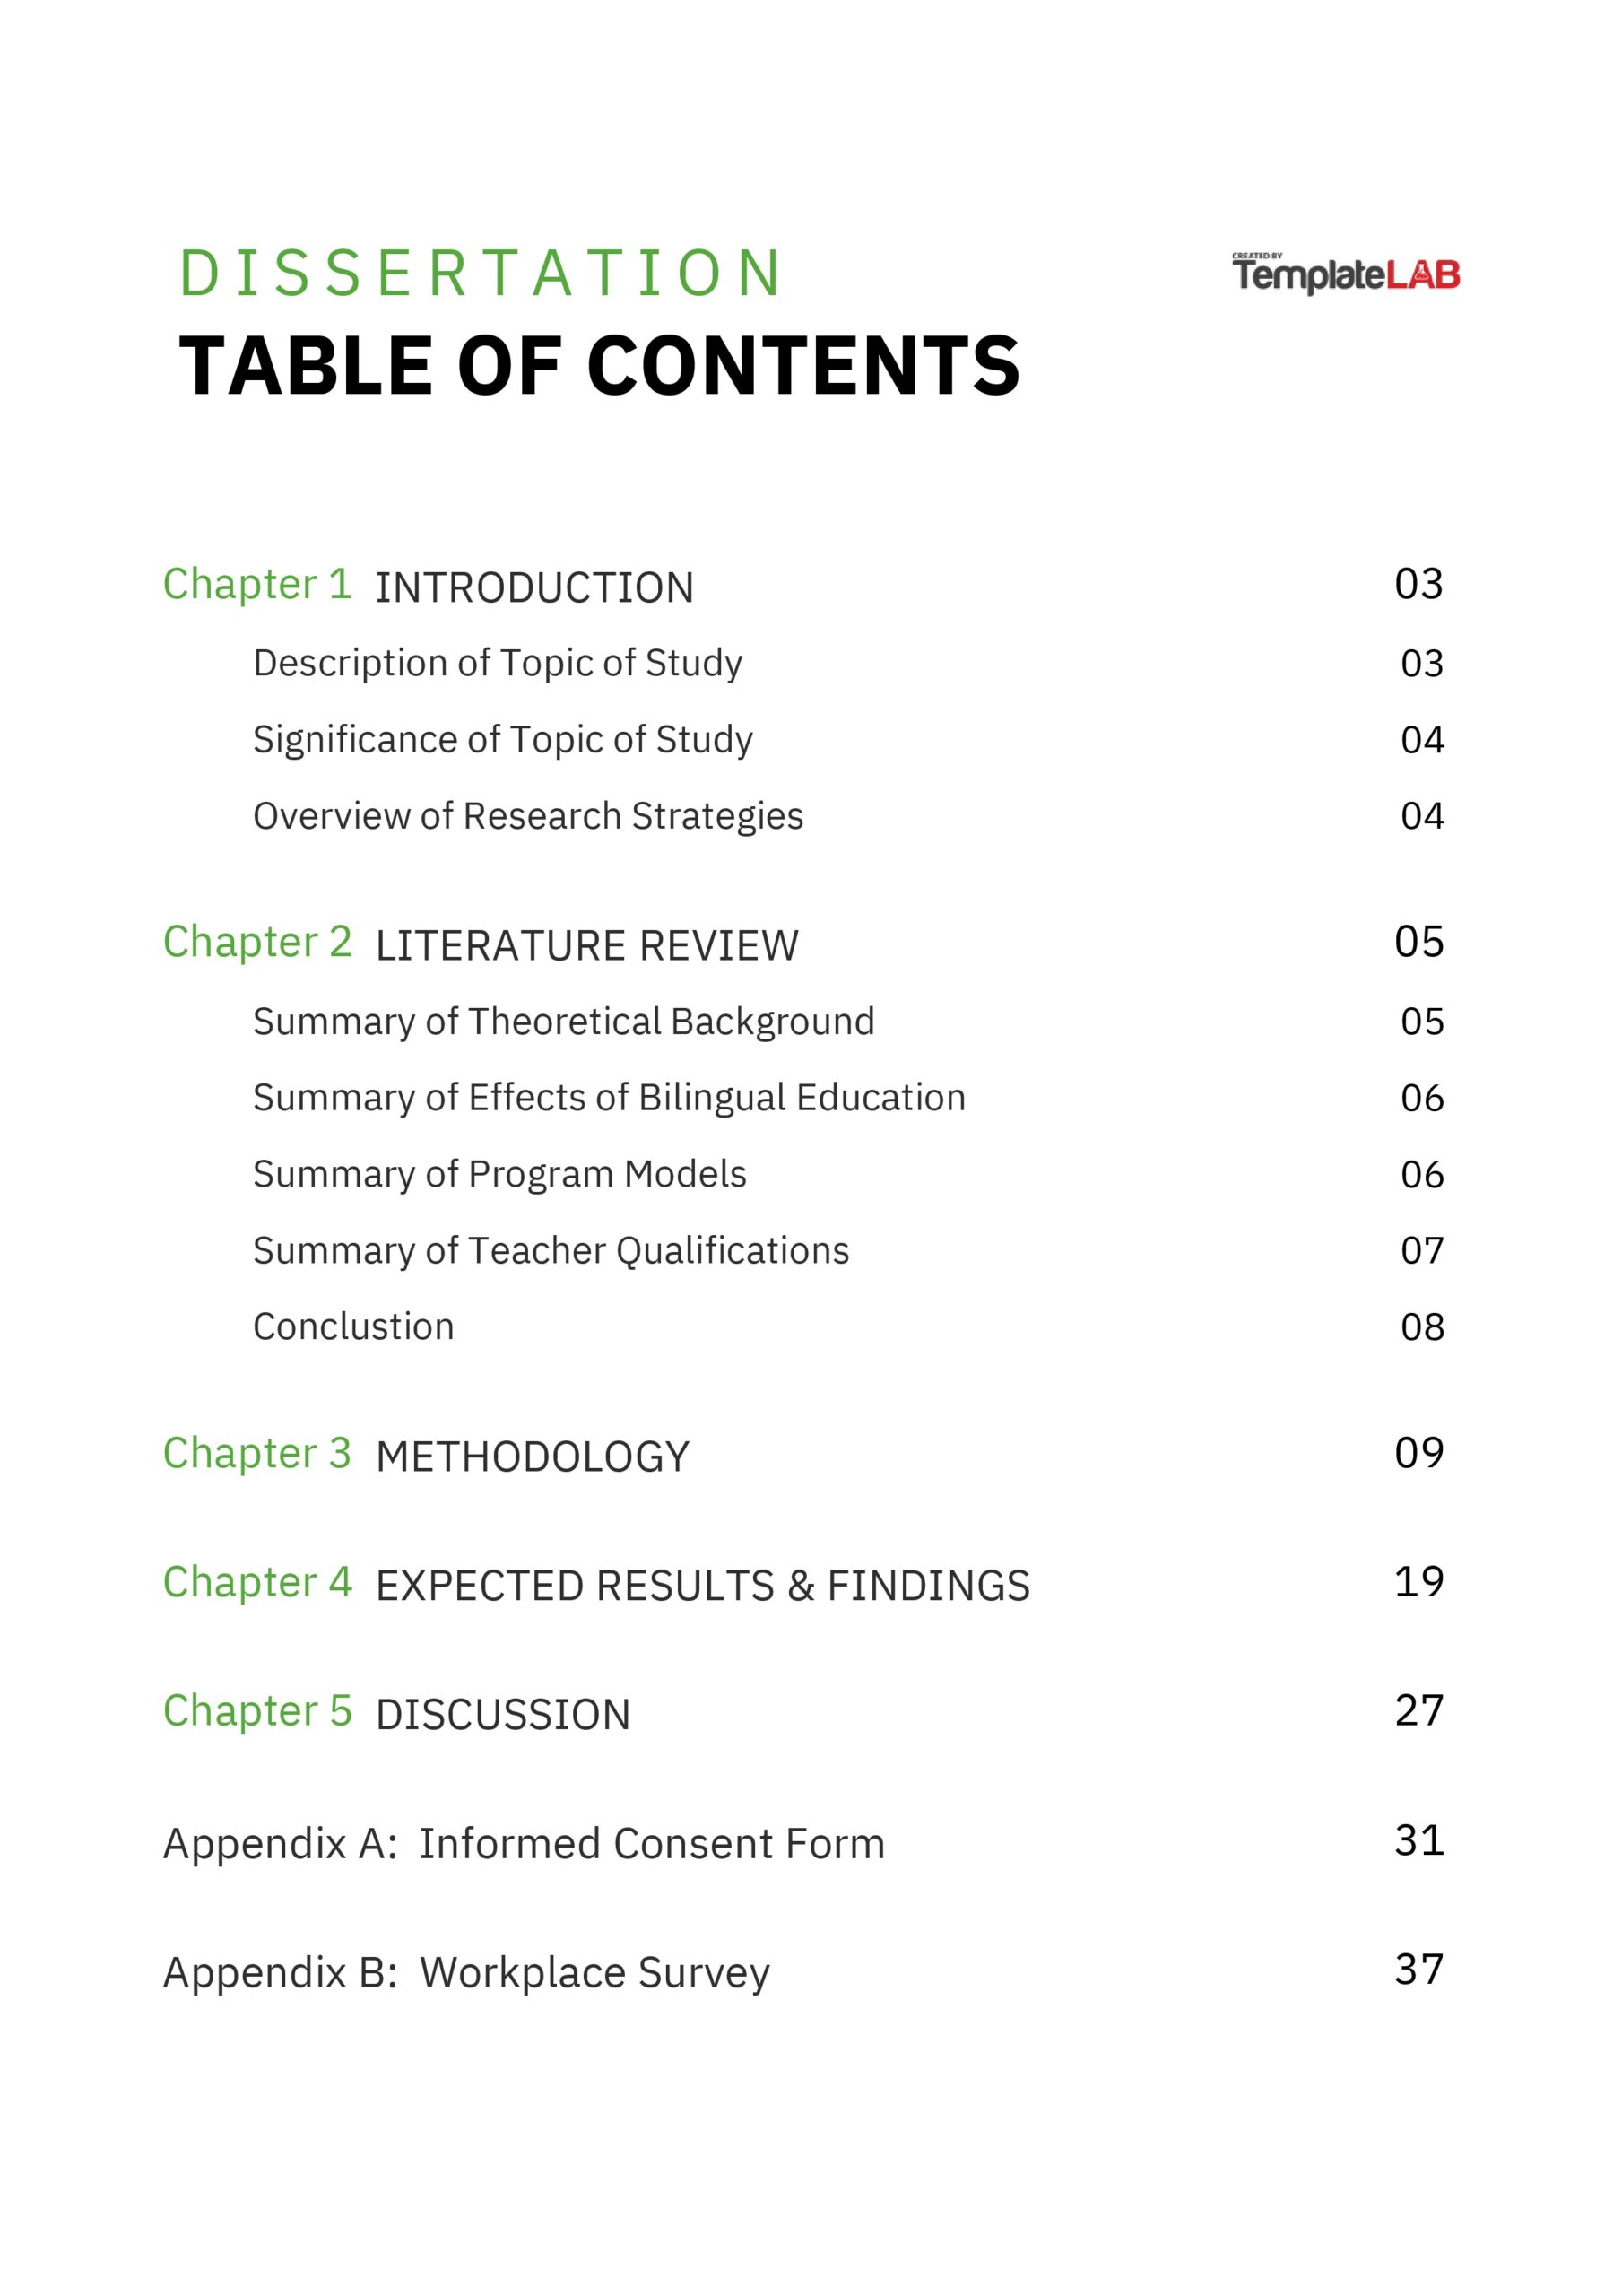 20 Table of Contents Templates & Examples [Word, PPT] ᐅ TemplateLab